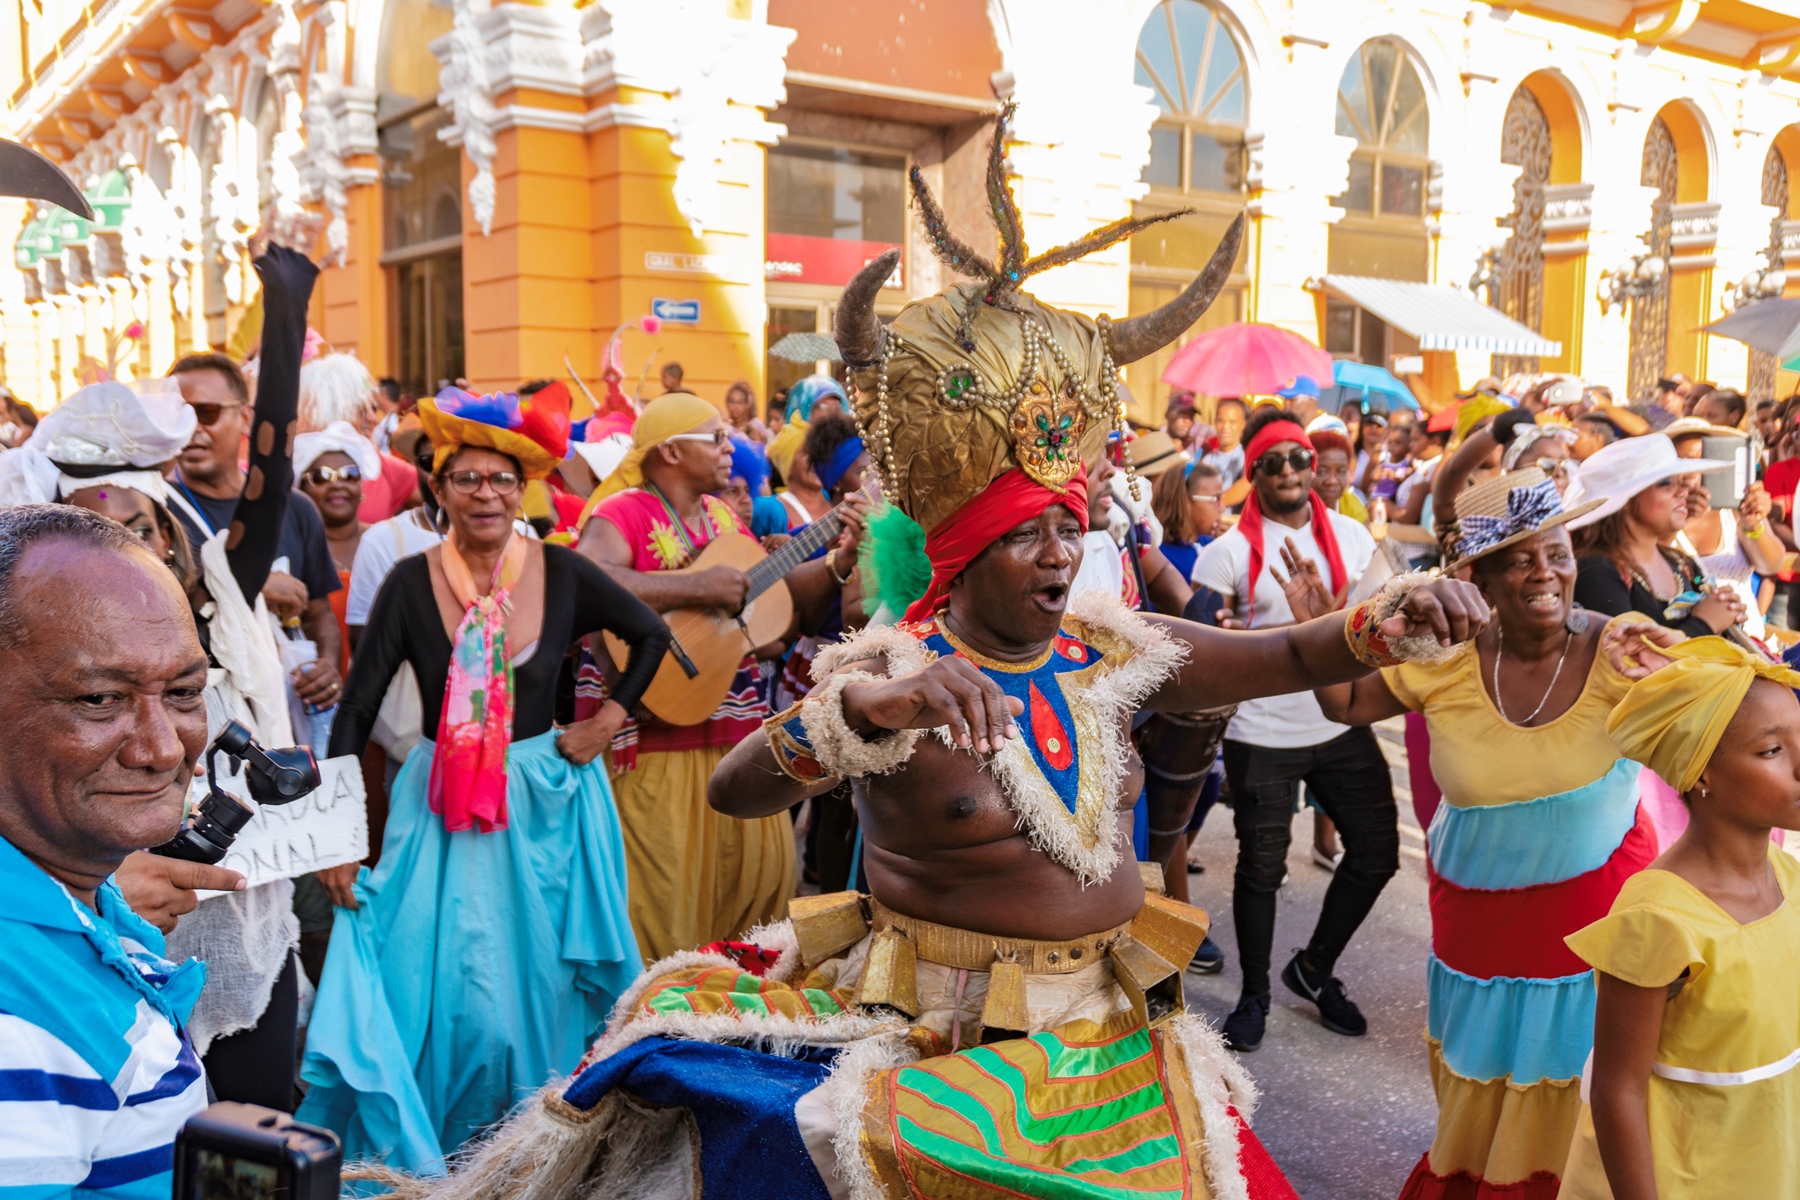 cuban culture and traditions